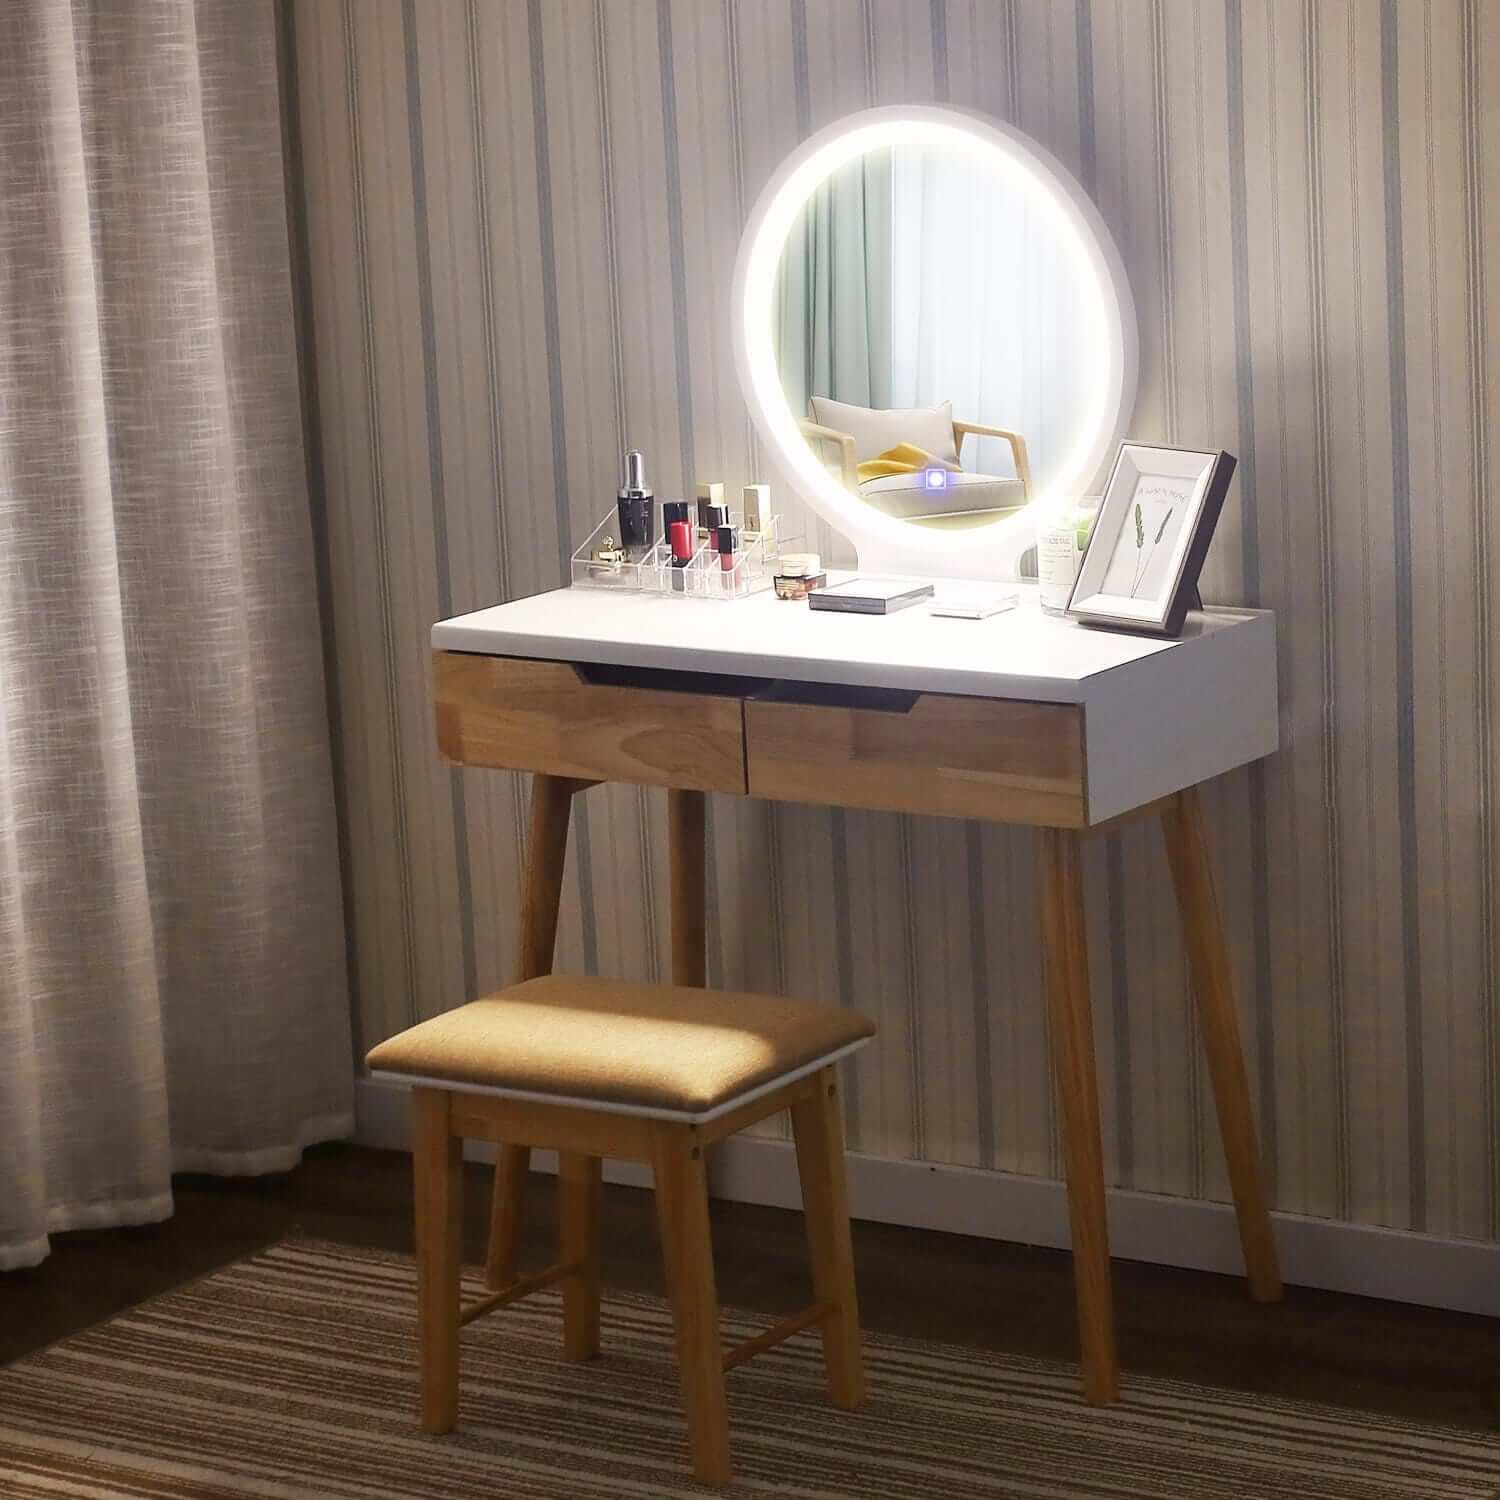 Elecwish Makeup dressing table 3 Lighting Modes Round Mirror Wood Dressing Table 2 Drawers with open light status